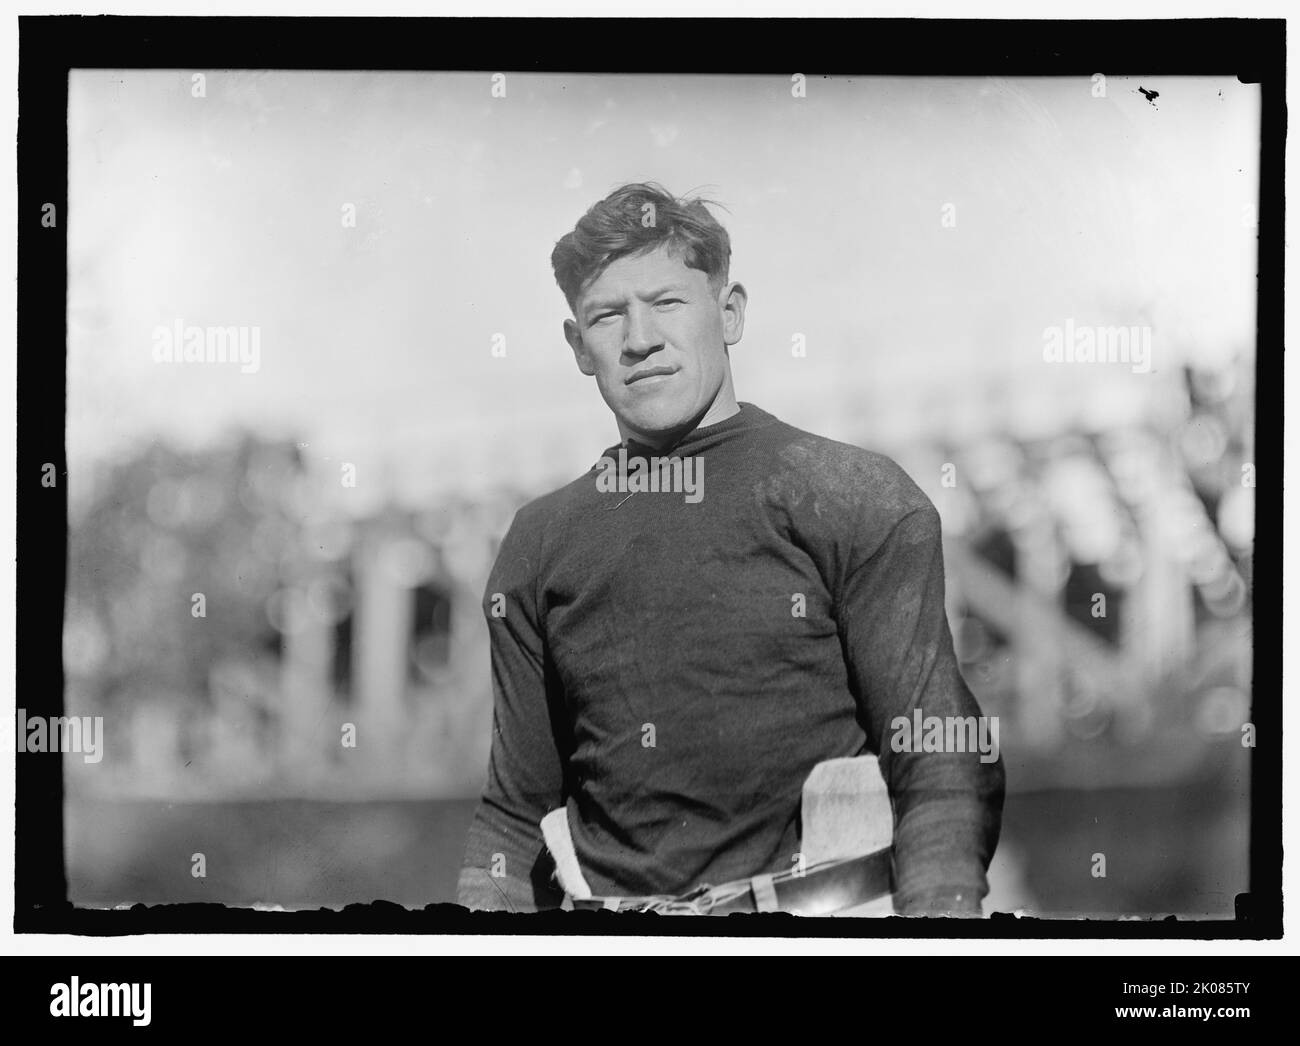 Football player Jim Thorpe, between 1910 and 1920. Athlete and Olympic gold medalist James Francis Thorpe was the first Native American to win a gold medal for the United States in the Olympics. Thorpe, a member of the Sac and Fox Nation, won two Olympic gold medals in the 1912 Summer Olympics, and also played American football, baseball and basketball. Stock Photo